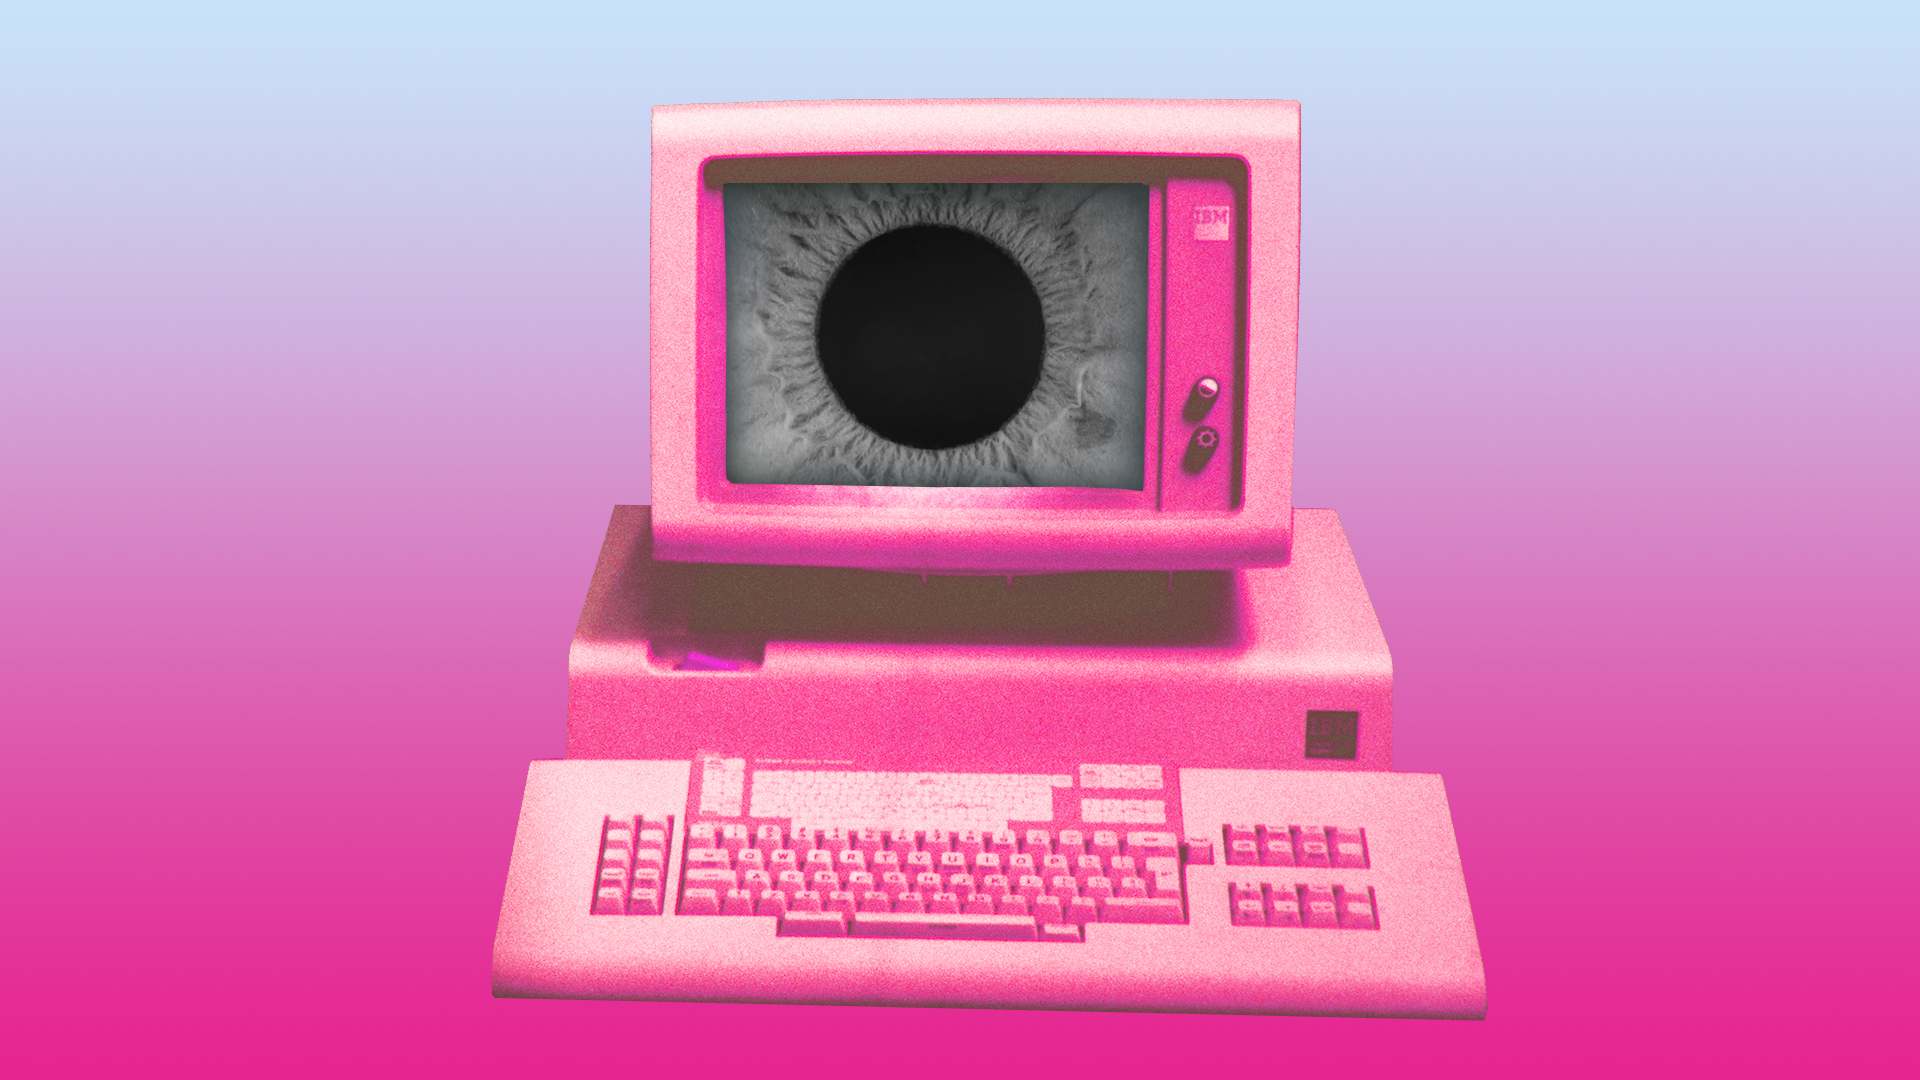 An old IBM PC recolored pink with an ominous eye on screen.